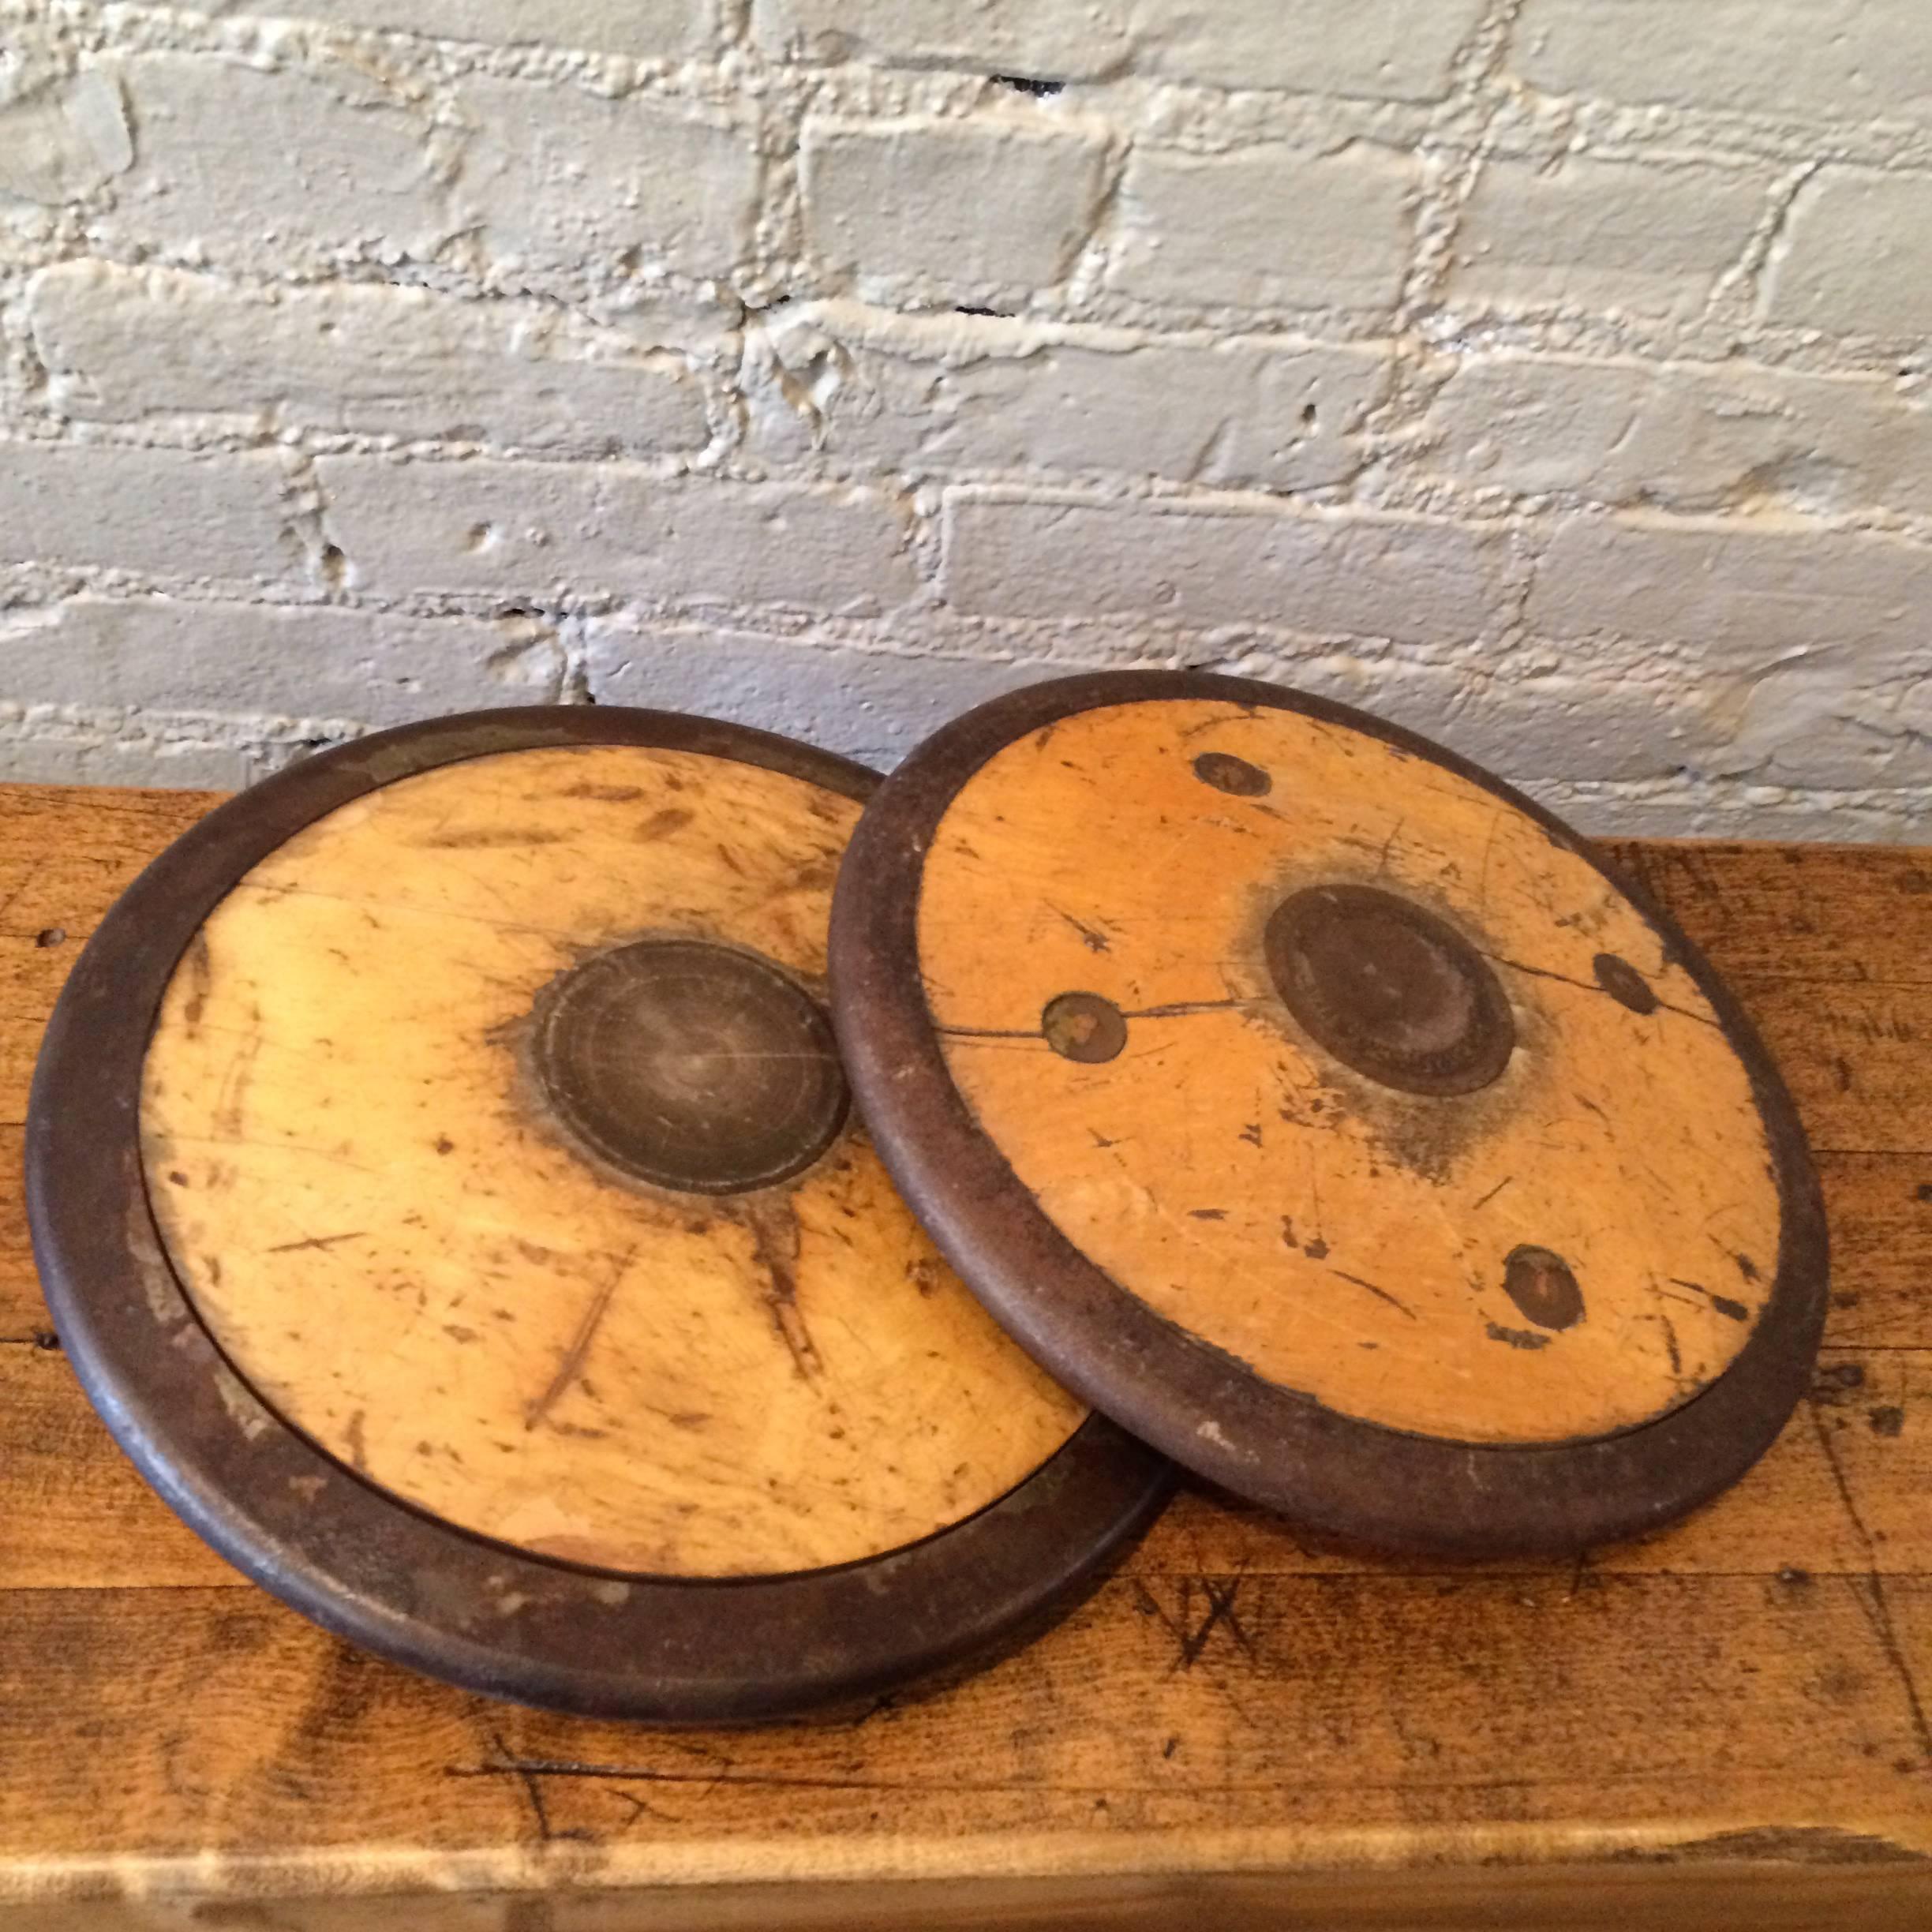 Wood and iron, gymnastics discus for track and field, circa 1940. One available.